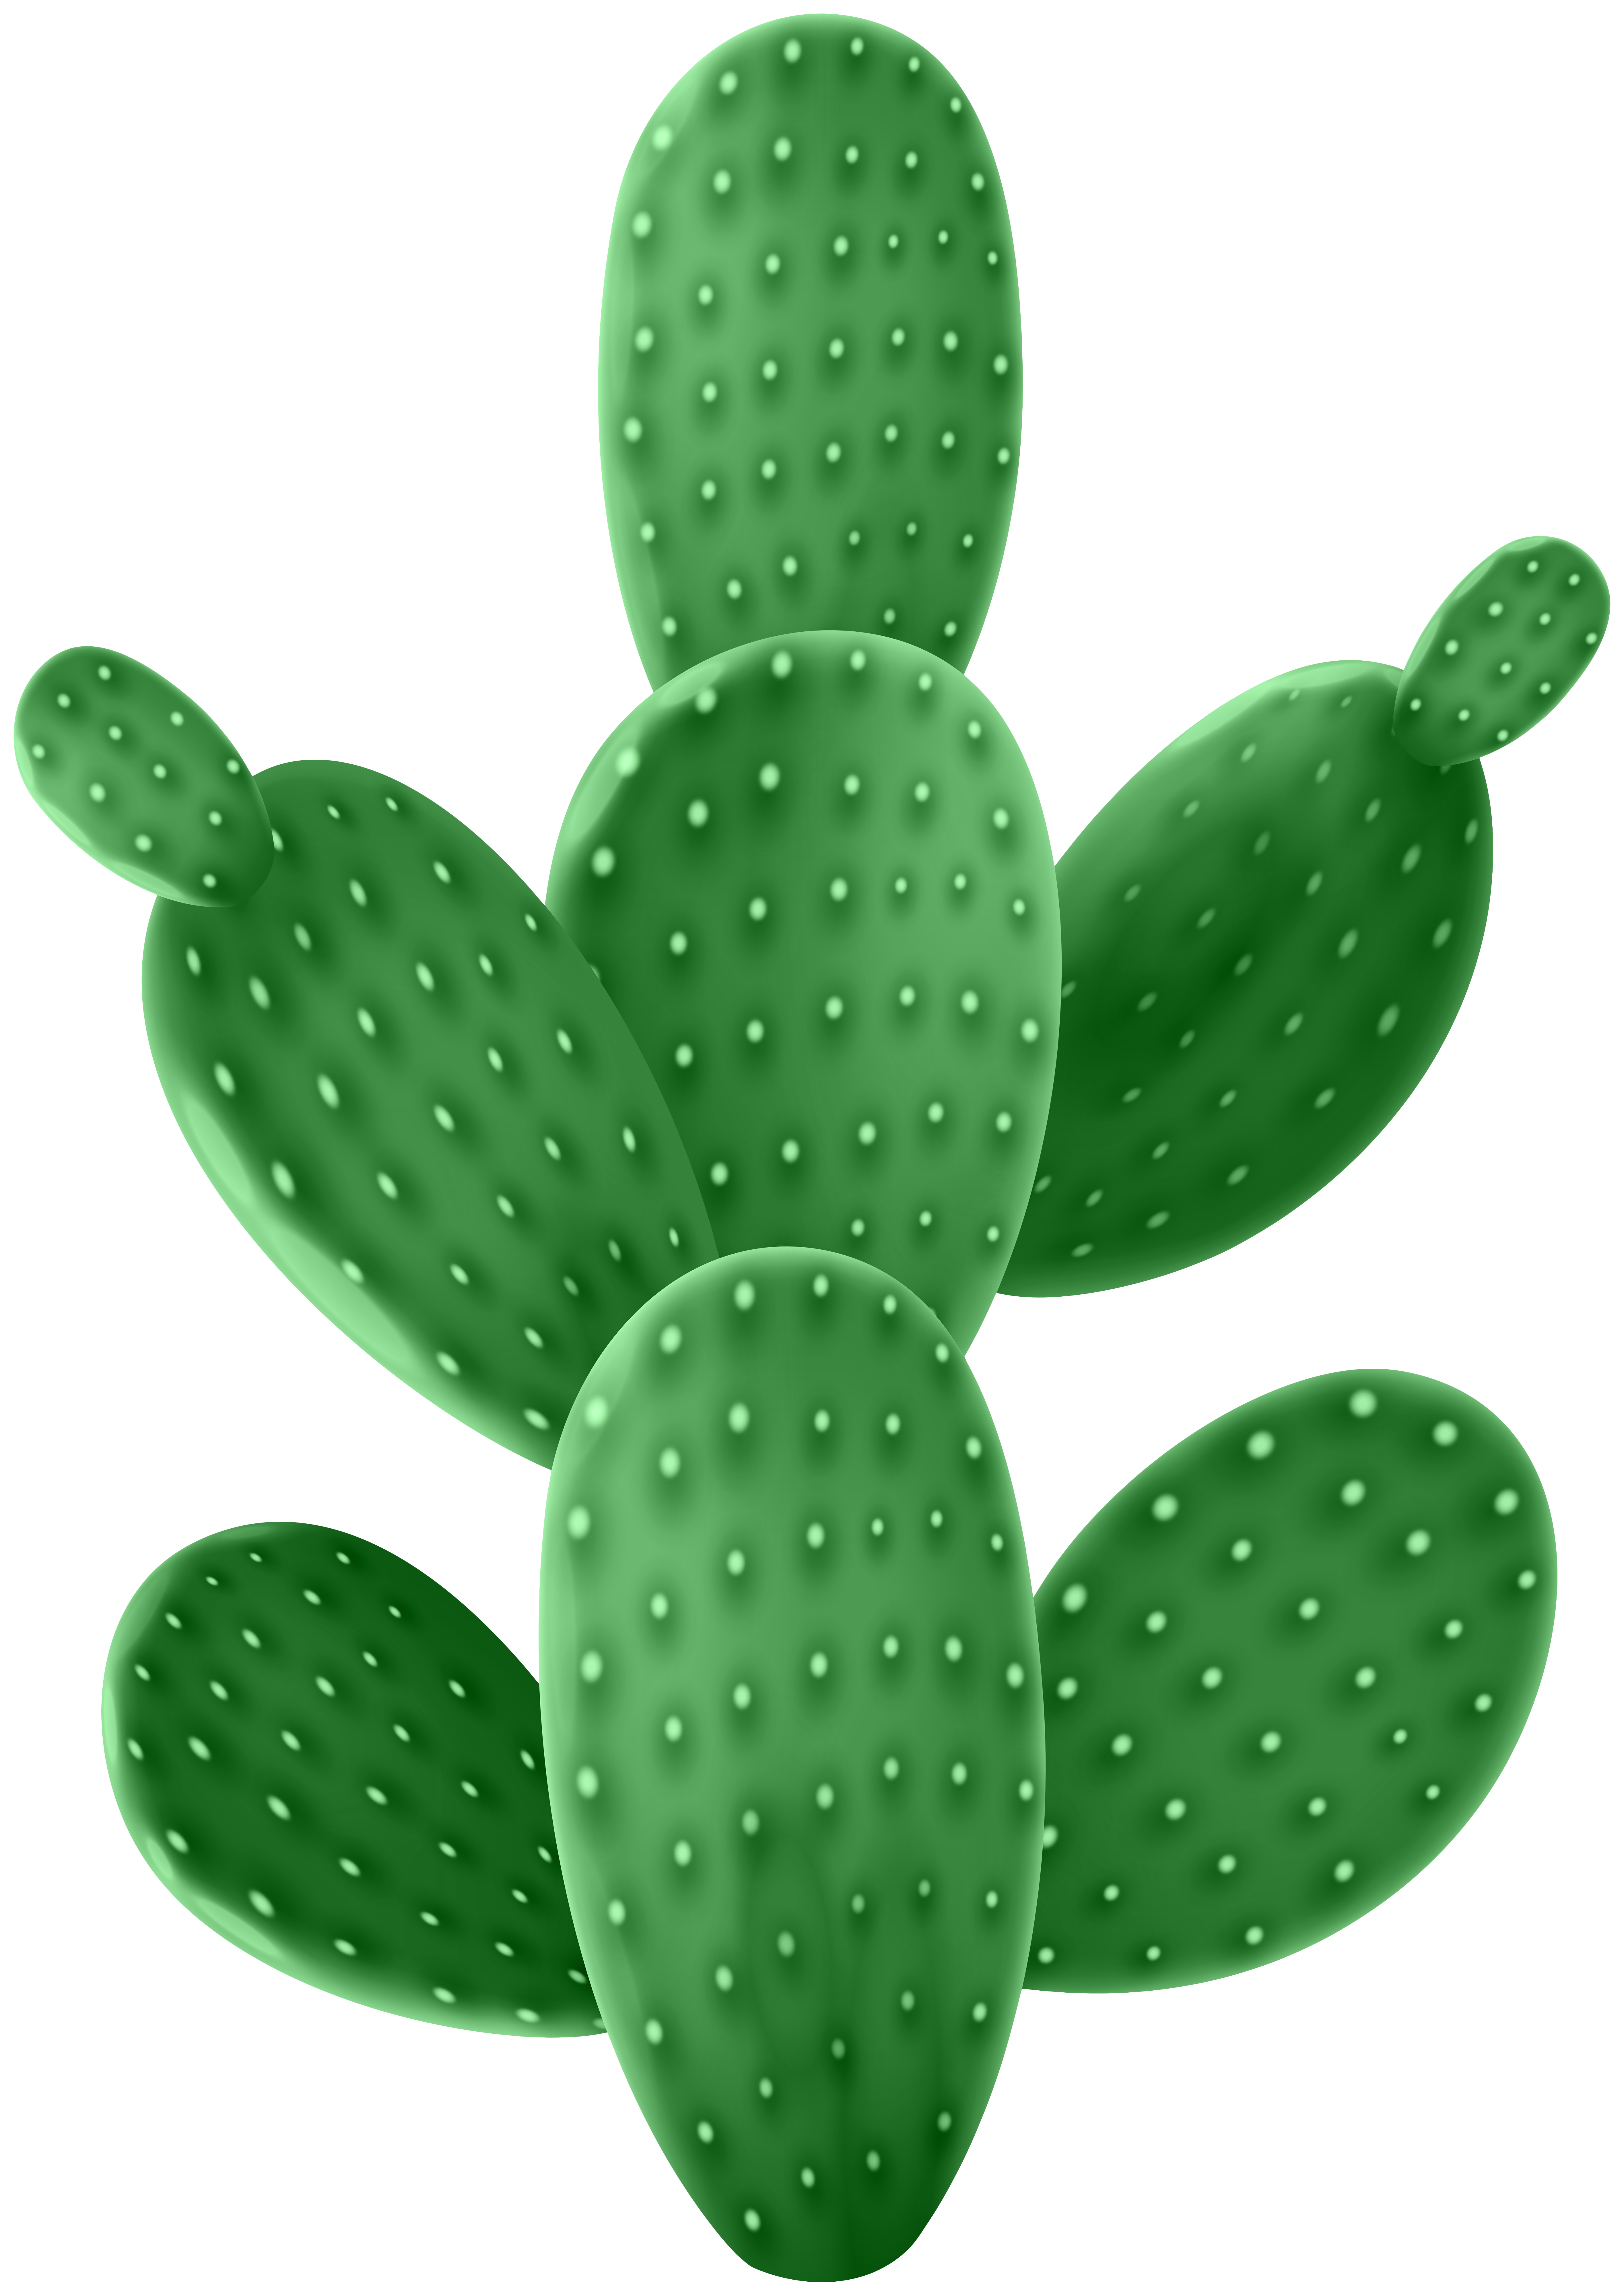 Cactus PNGs for Free Download